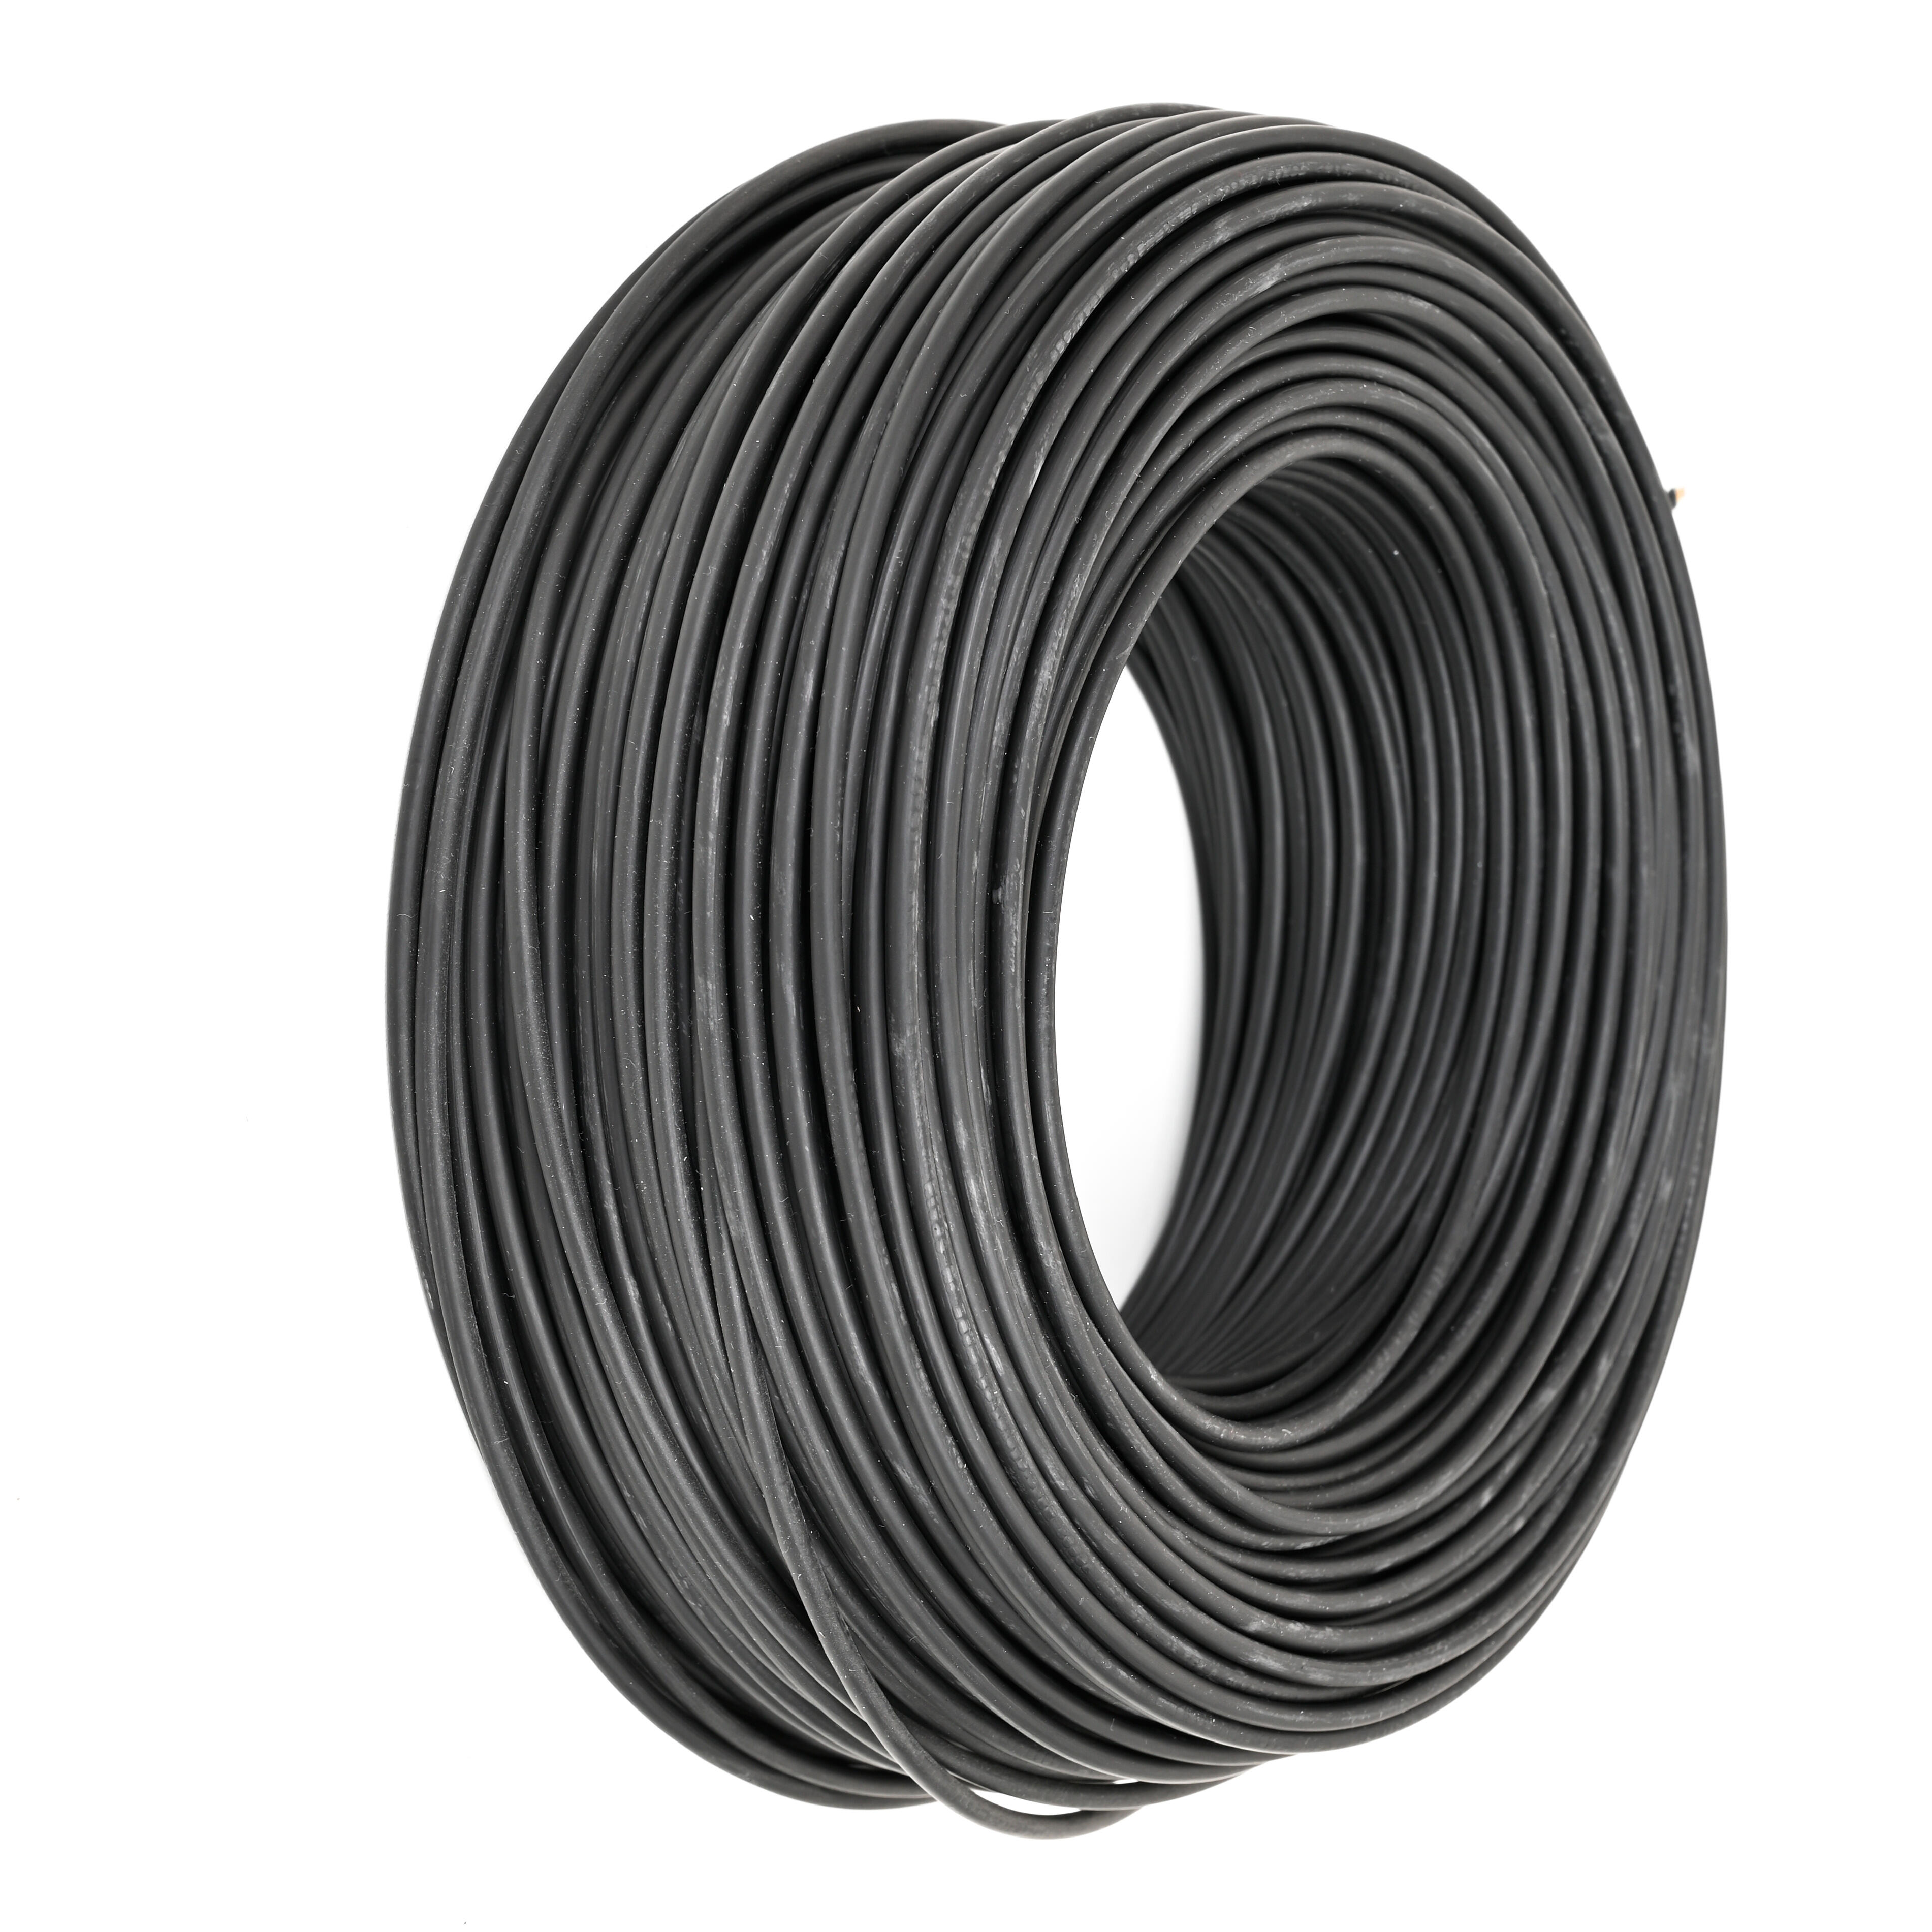 Cable h07z1-k negro 2,5 mm² 200 metros